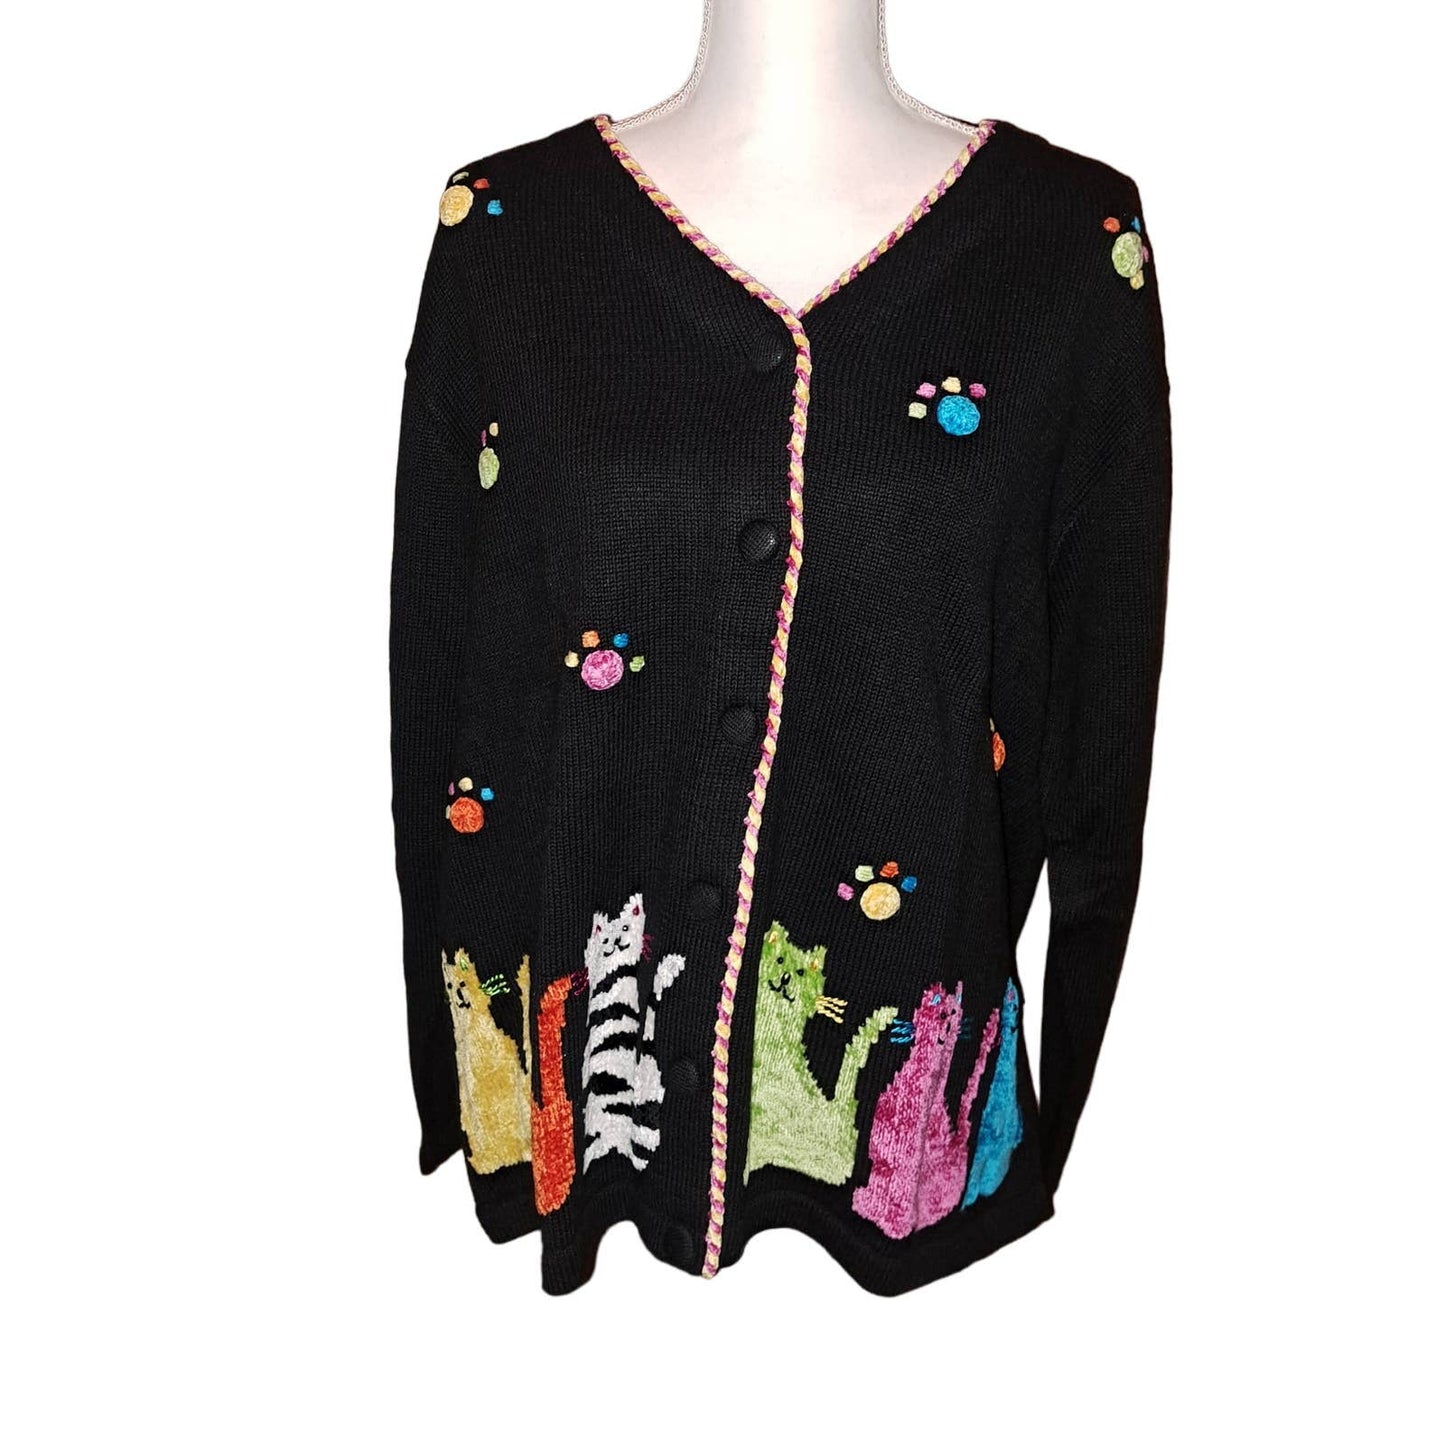 NWT-Quacker Factory Black Button Cardigan Embroidered Cats 1X